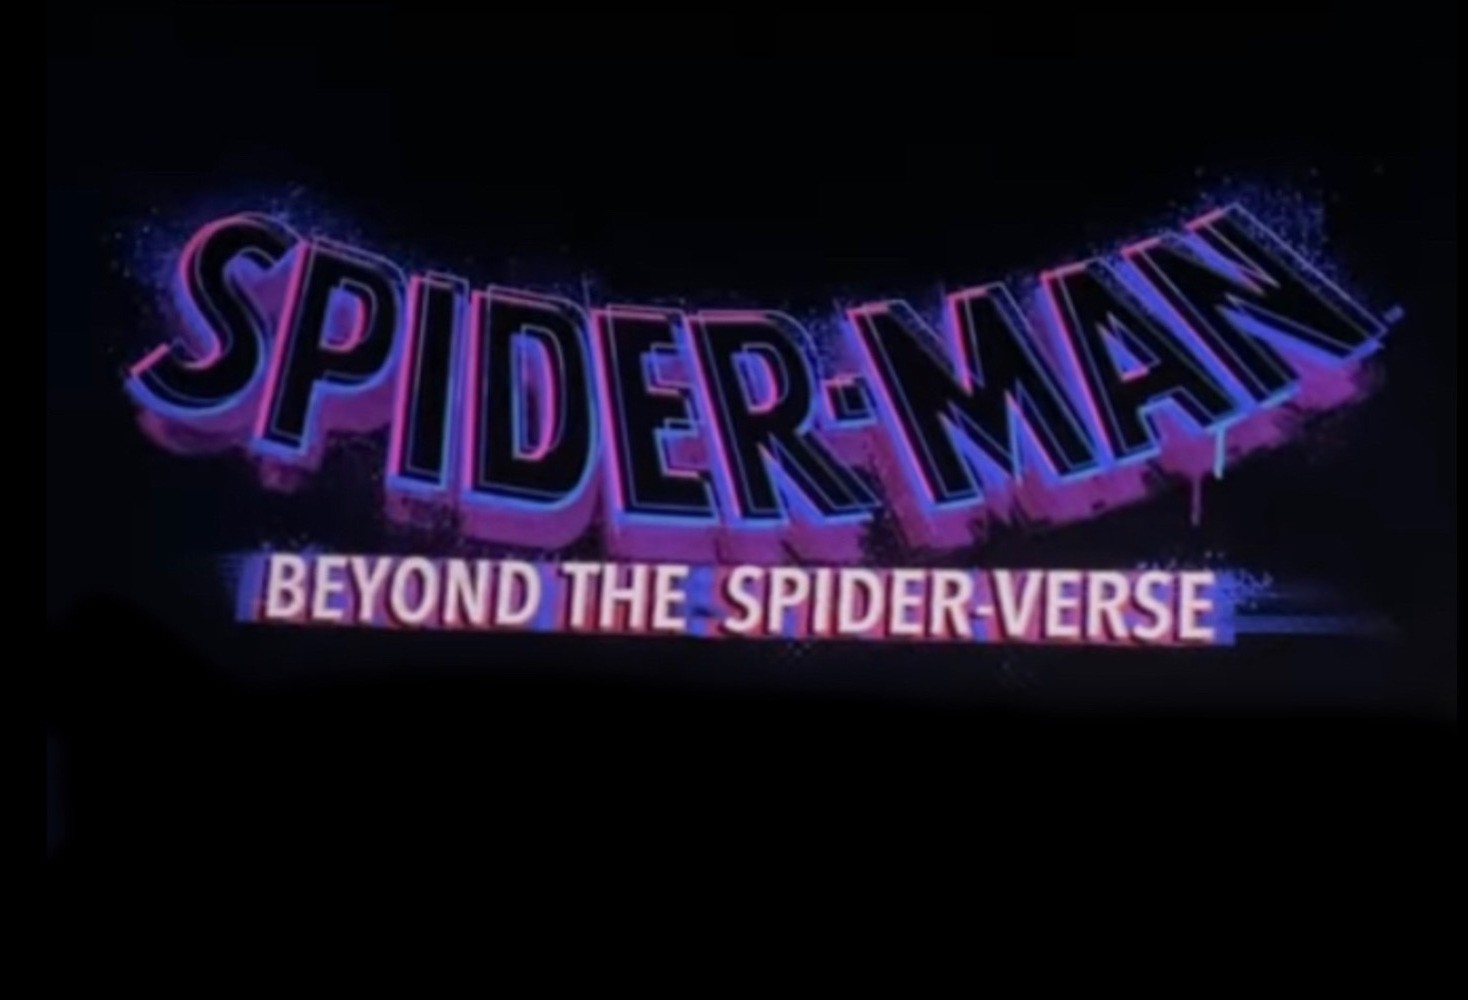 Get your hankies ready: Spider-Man: Beyond the Spiderverse Gets a Much  Awaited Update That's Exactly What the Fans Needed After Untimely Delays